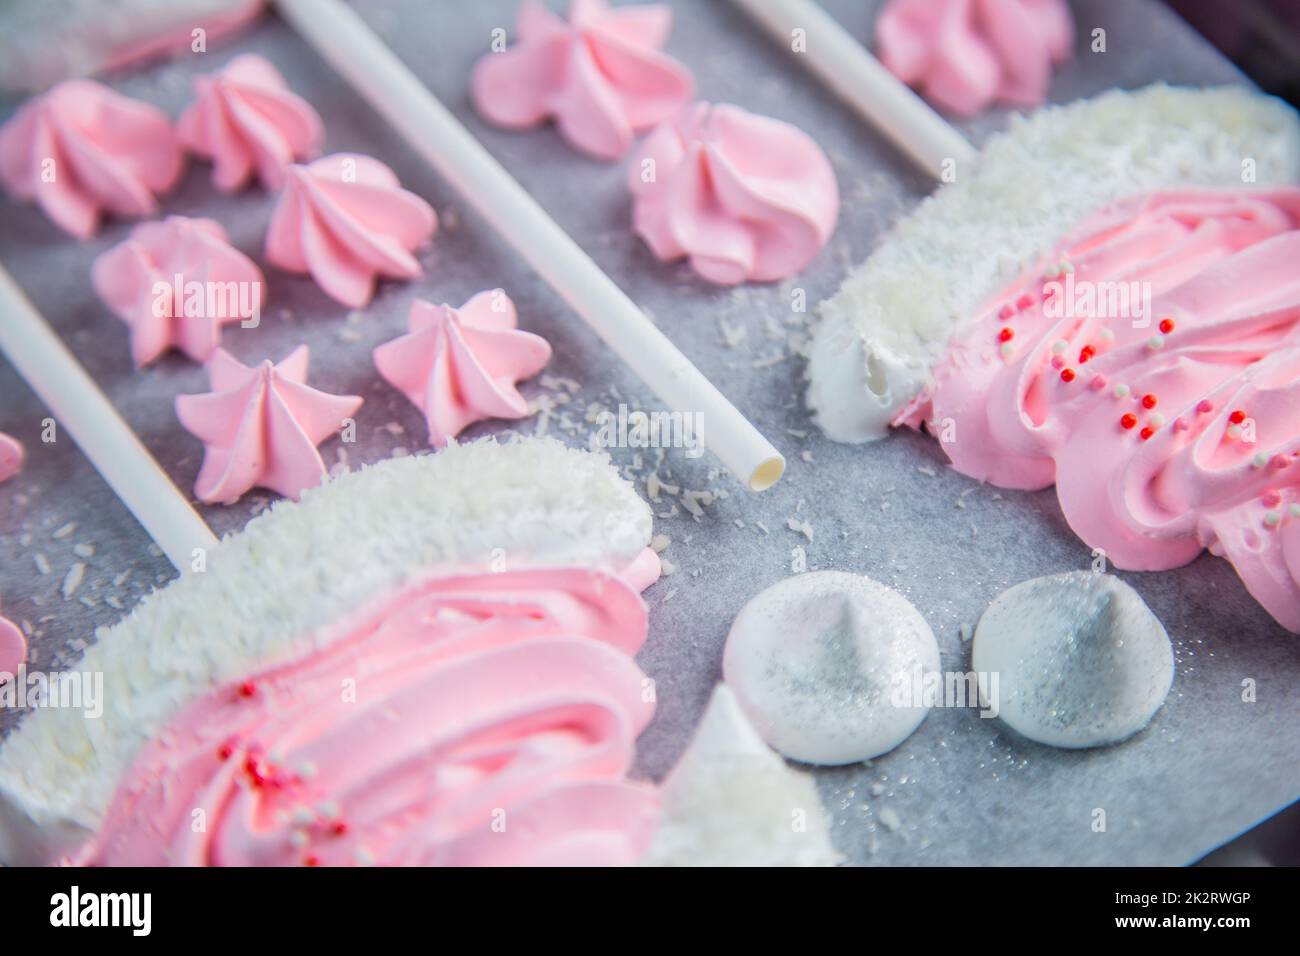 Meringues in the form of pink Christmas hats with a pompom and a white lapel on a stick lie on white parchment in two rows, pink stars and white meringues lie between them Stock Photo